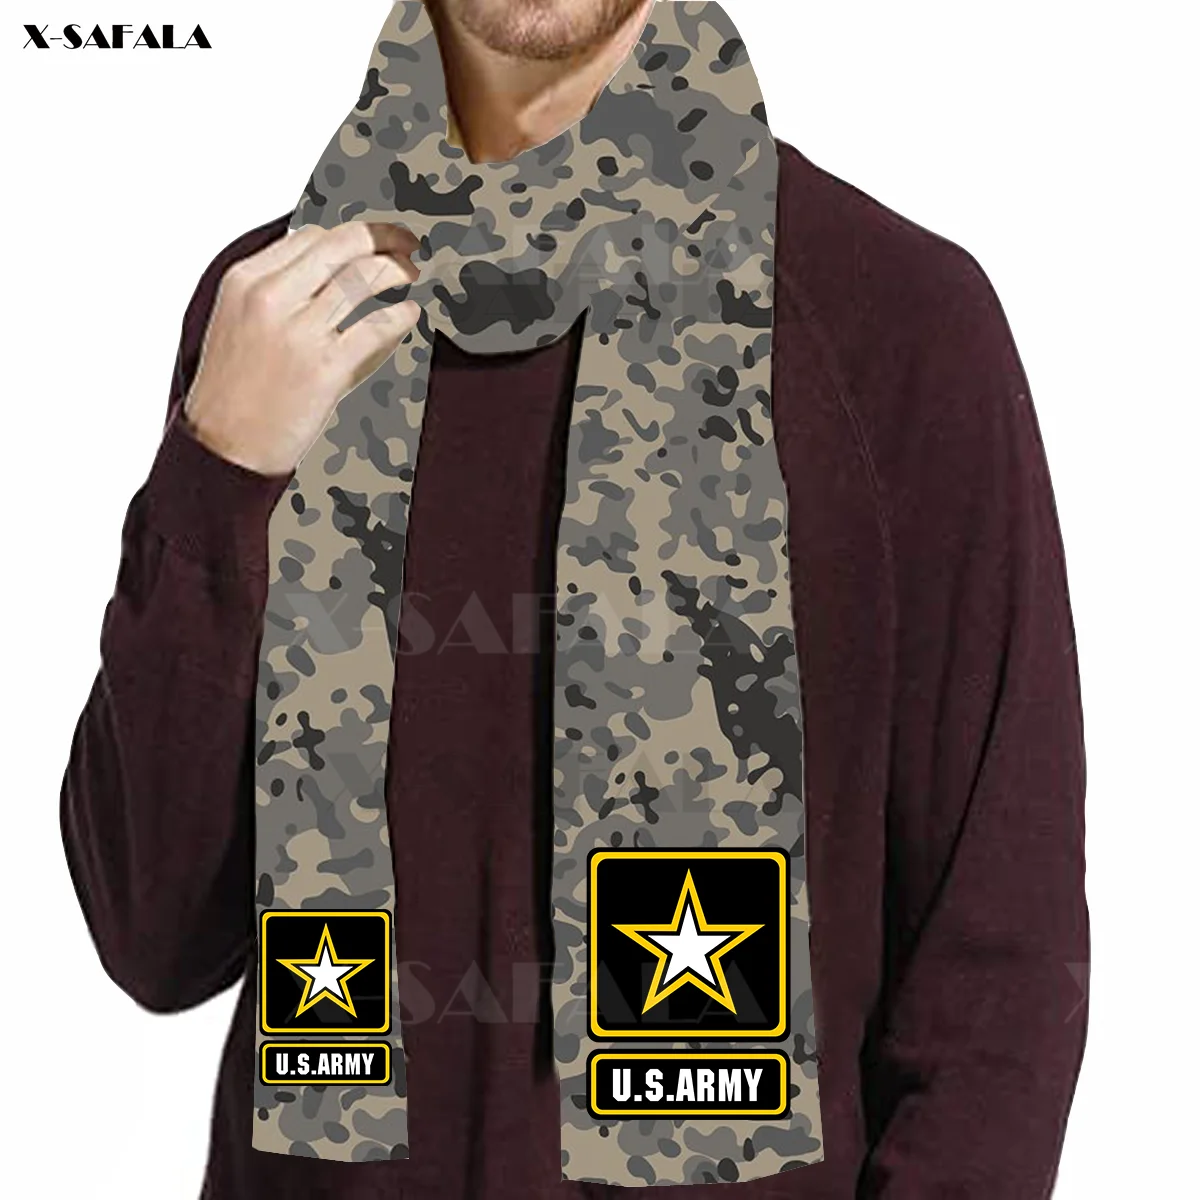 French Army Camouflage  3D Printed Scarf Long Scarves Shawl Muffler Men's Gift 100% Pure Cashmere Feel Super Soft paul smith scarves